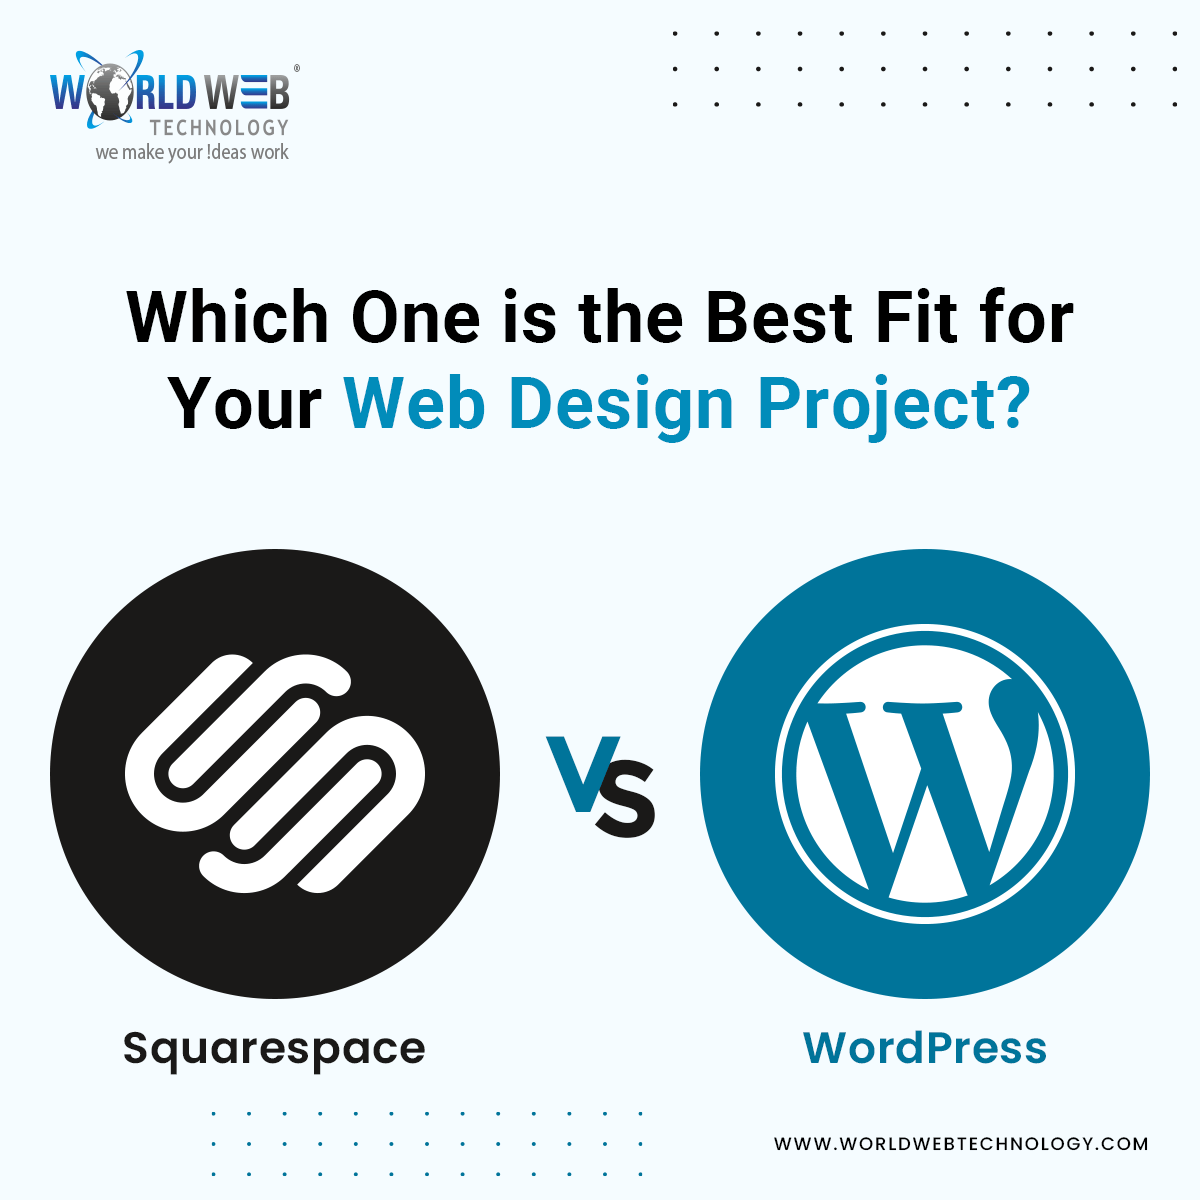 Squarespace vs WordPress: Which One is the Best Fit for Your Web Design Project?